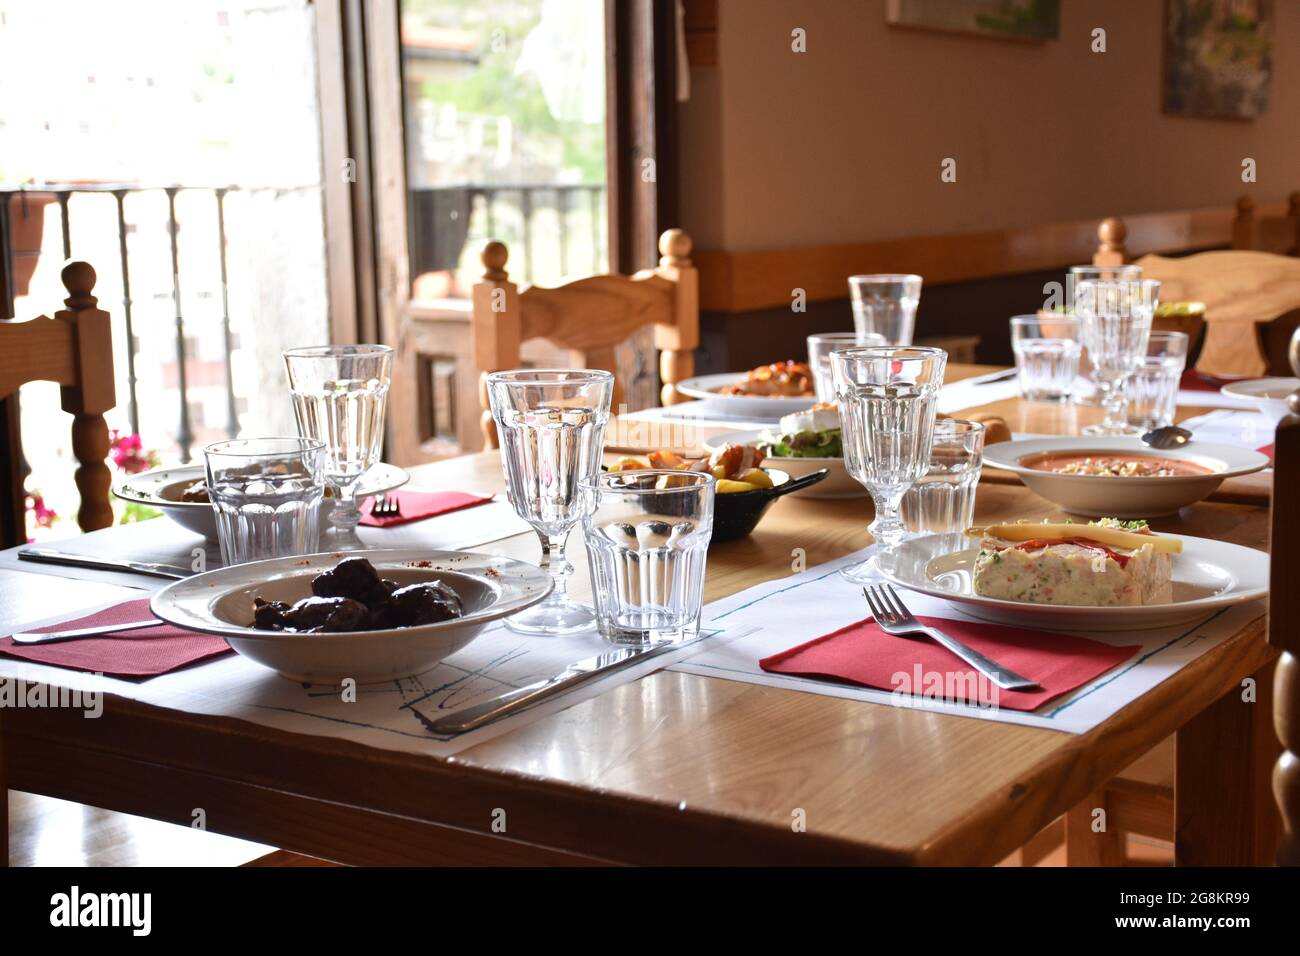 Restaurant table with plates full of food in rural area restaurant. Everything ready to eat and with lots of light coming through the window. Stock Photo